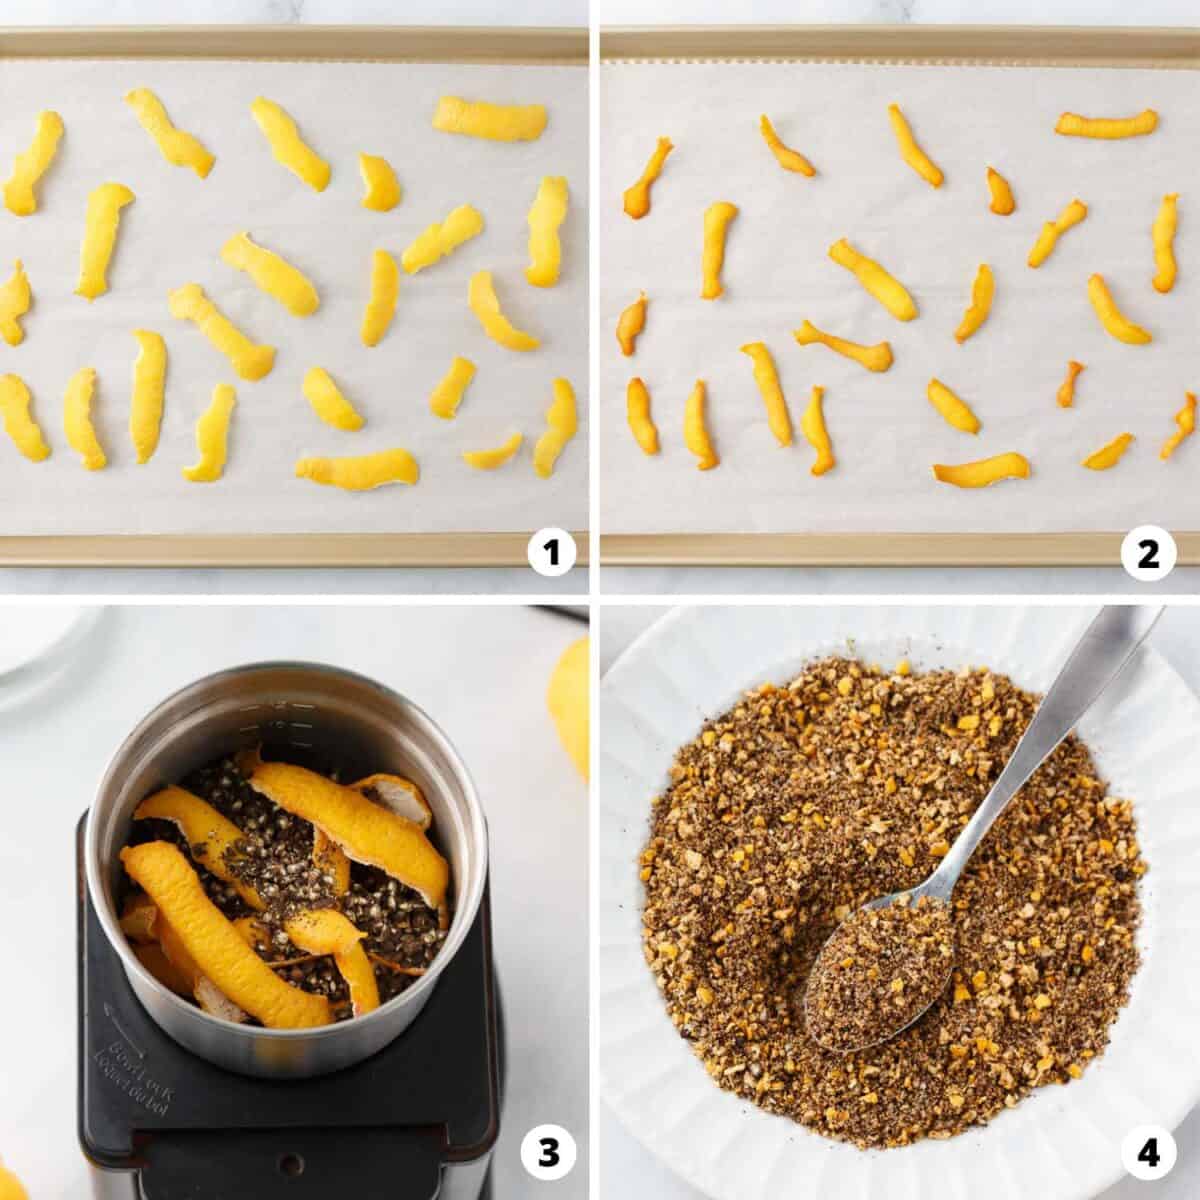 Showing how to make lemon pepper seasoning in a 4 step collage.